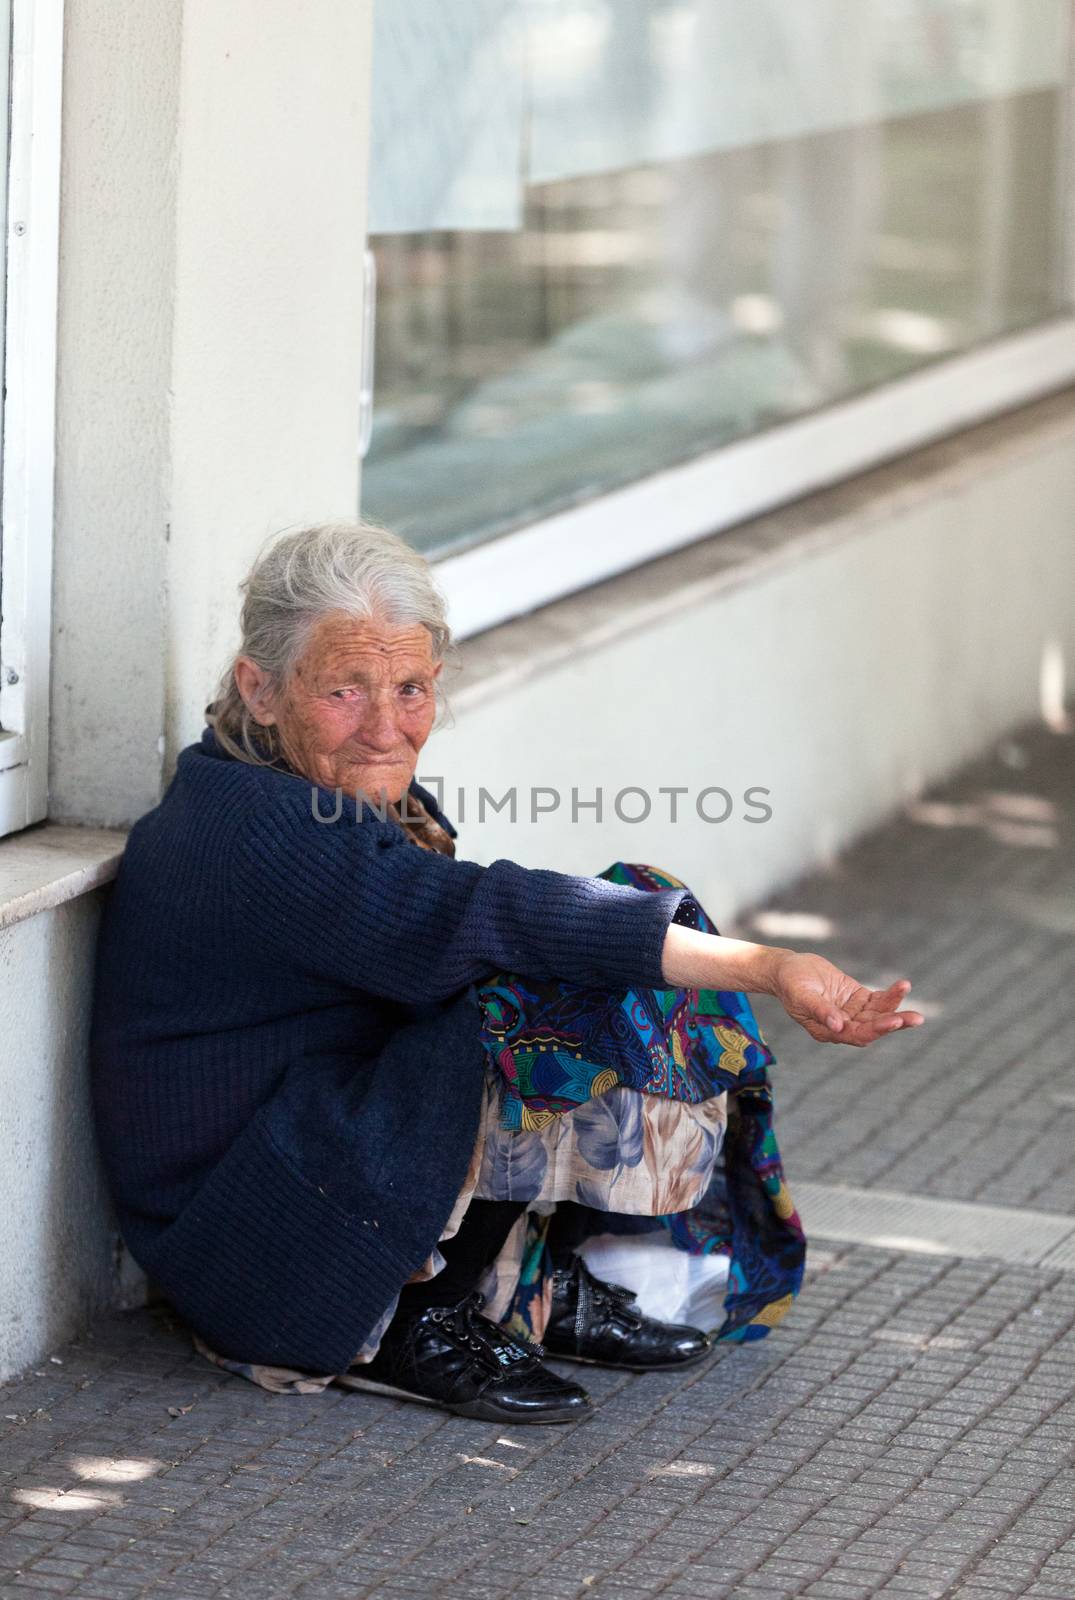 THESSALONIKI, GREECE - JUNE 28: The number of beggars in the city has increased dramatically. The economic crisis has hit the elderly on June 28, 2011 in Thessaloniki, Greece